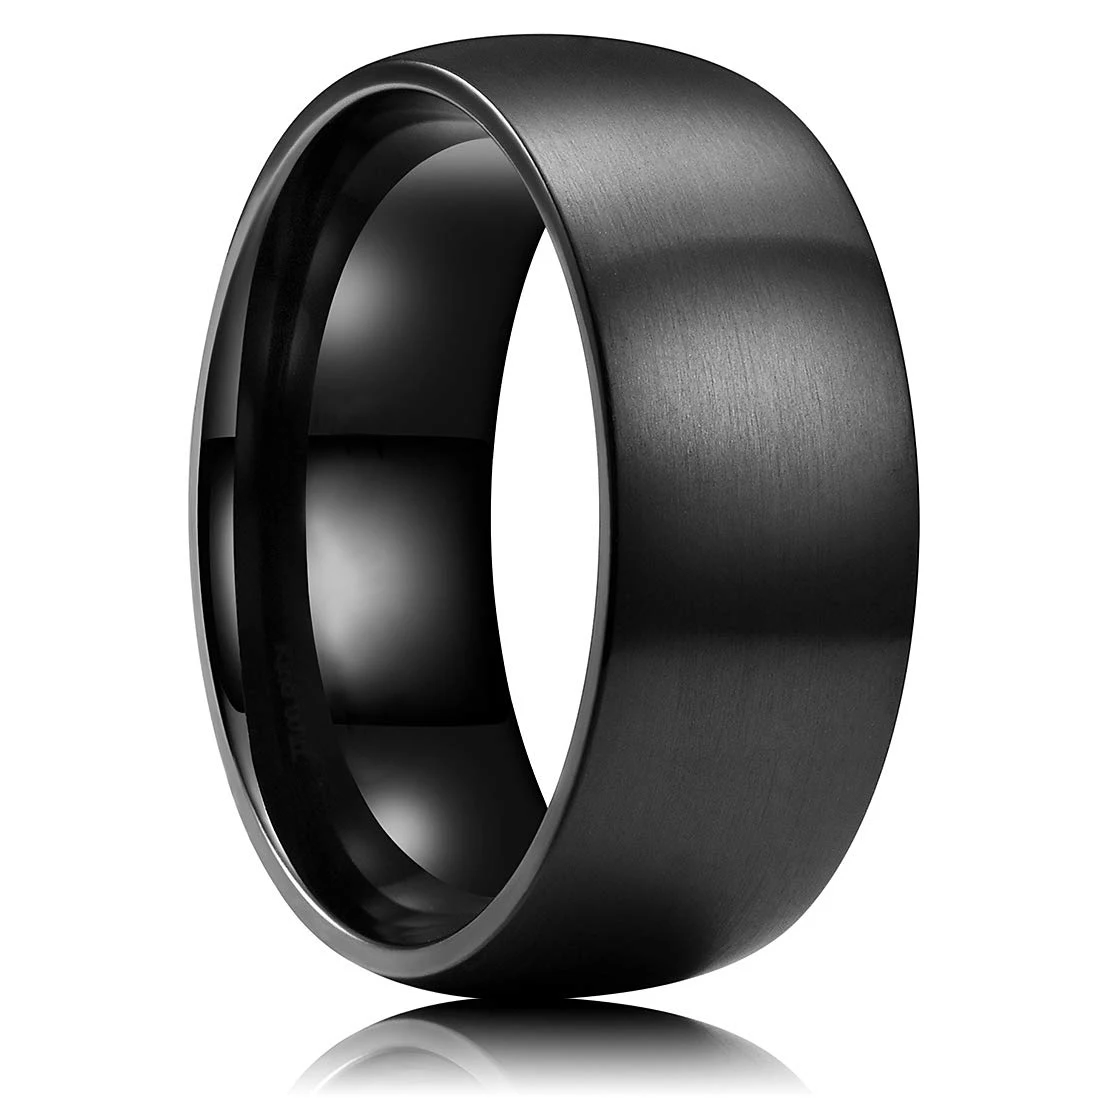 

Simple Men Rings Titanium Stainless Steel Rings For Men Matte Brushed Wedding Engagement Band Unisex Jewelry Gifts Drop Shipping